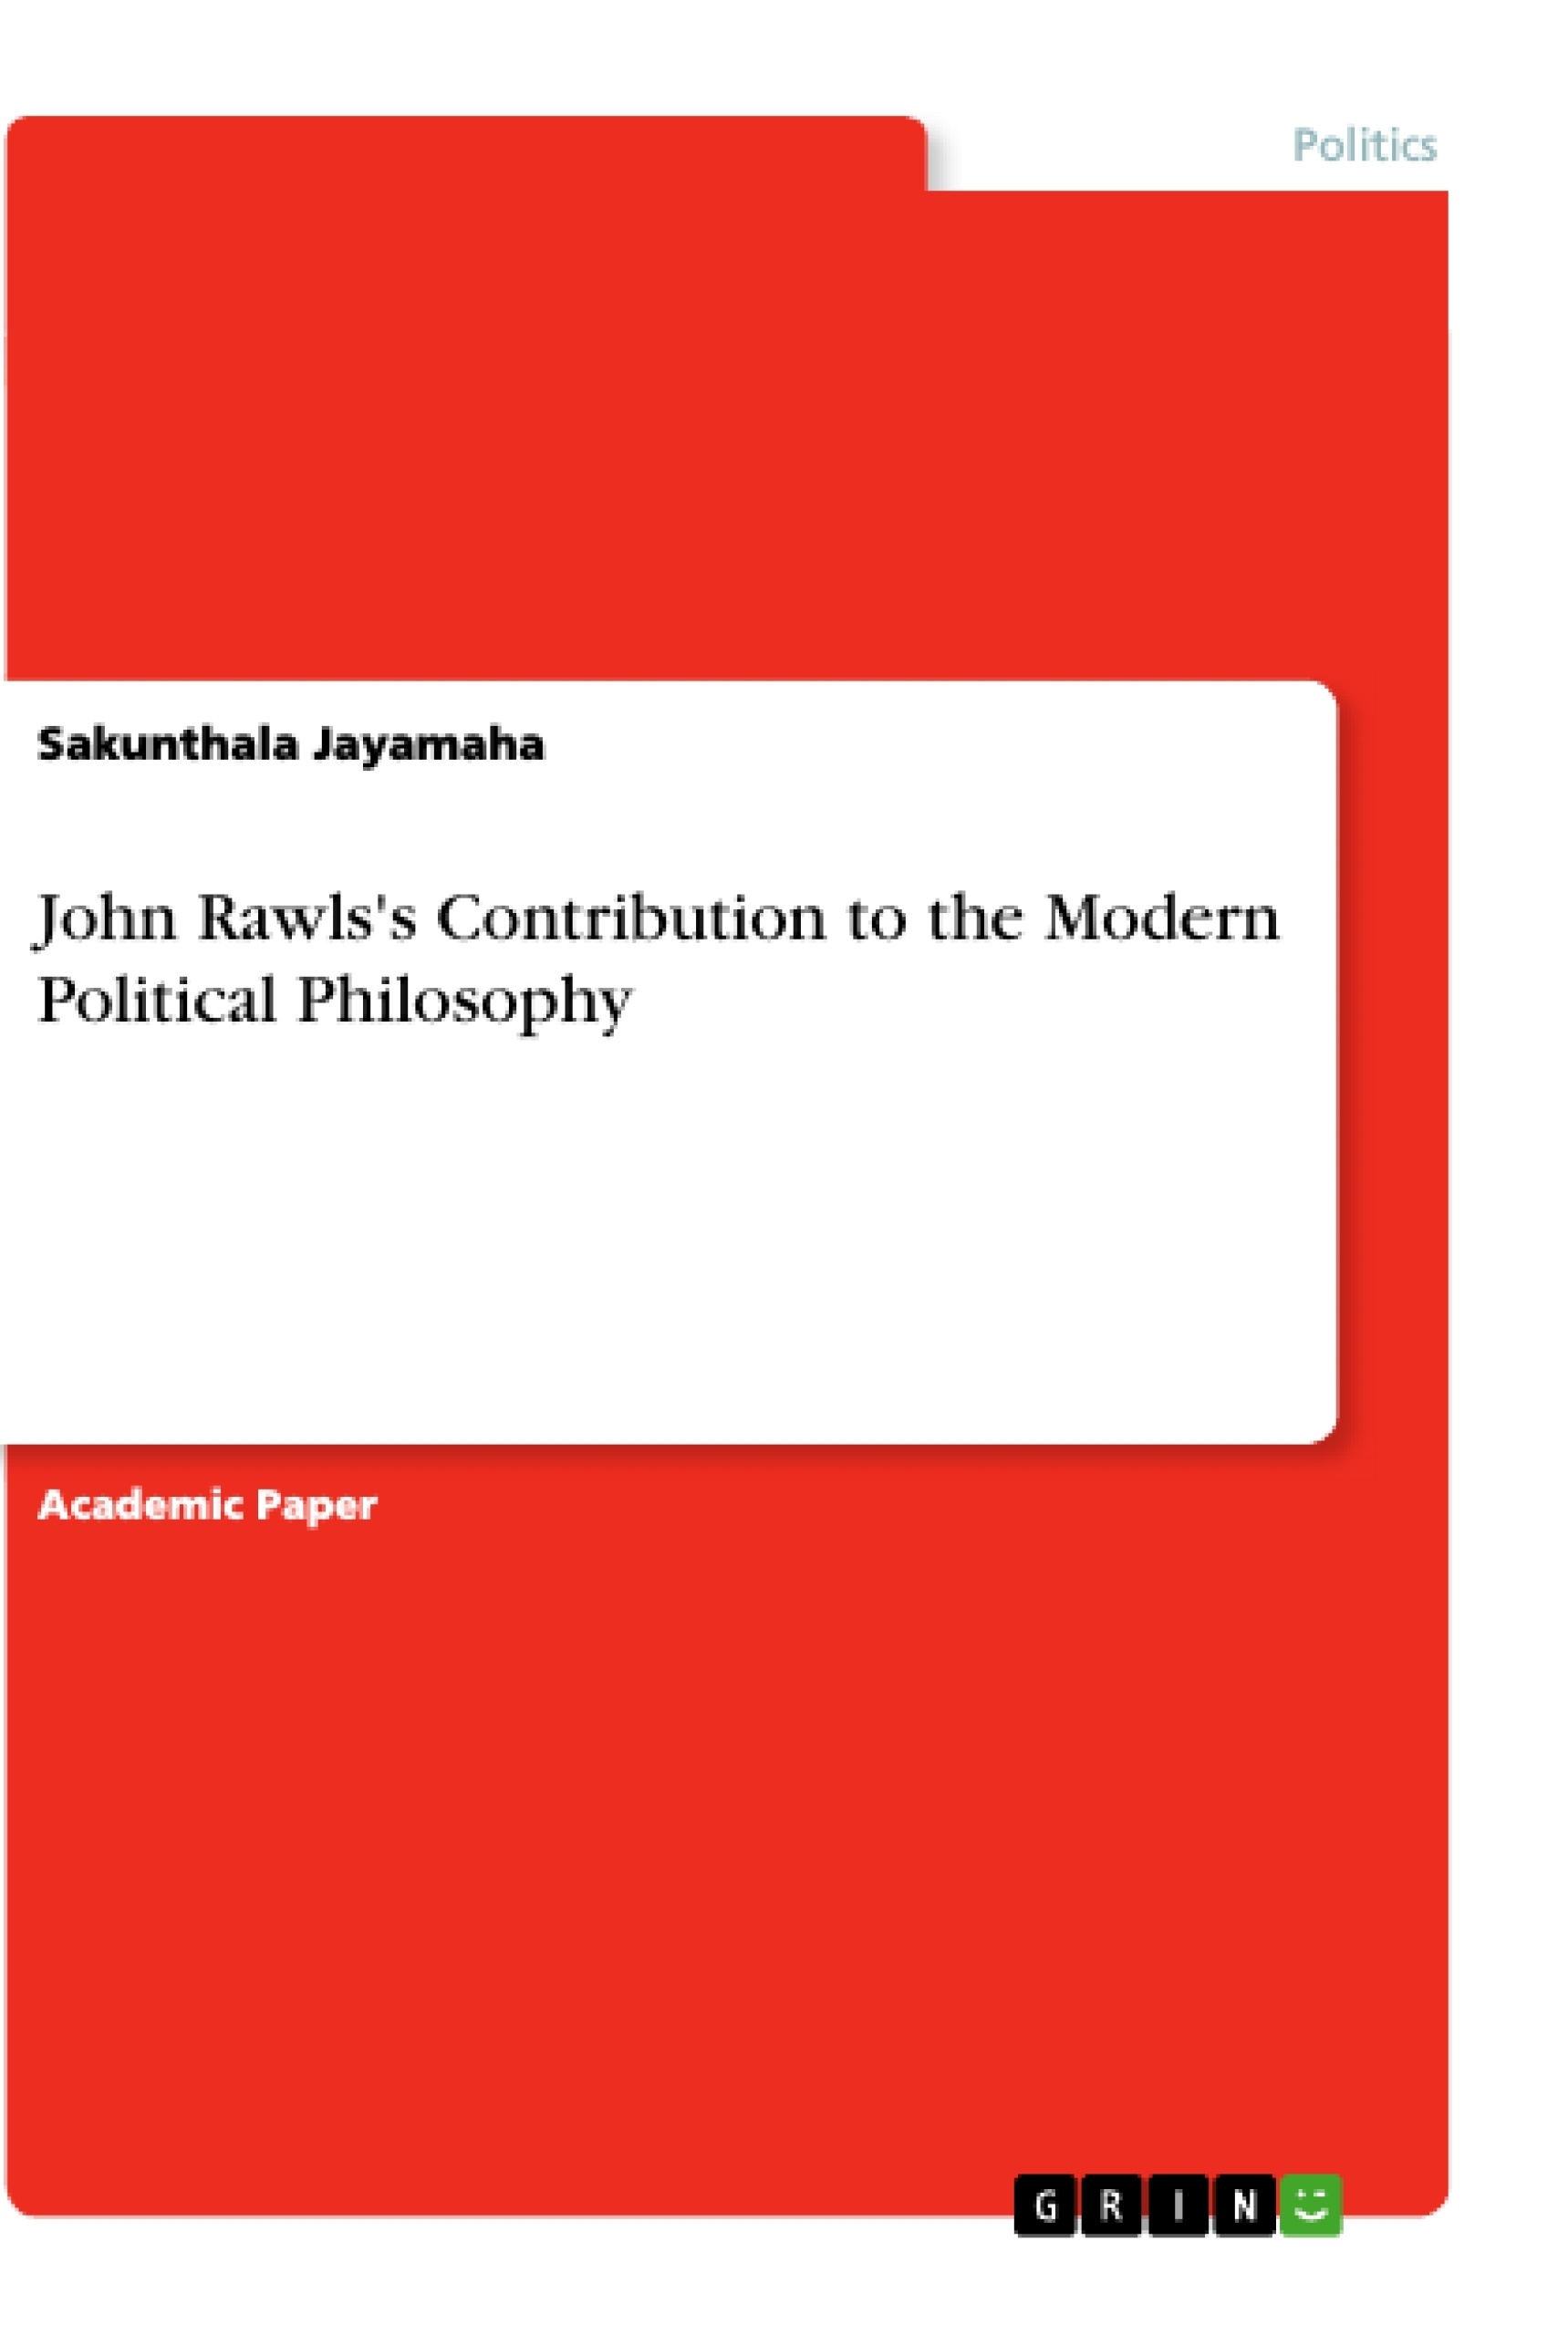 Rawls's　Philosophy　Modern　Political　John　the　to　Contribution　GRIN